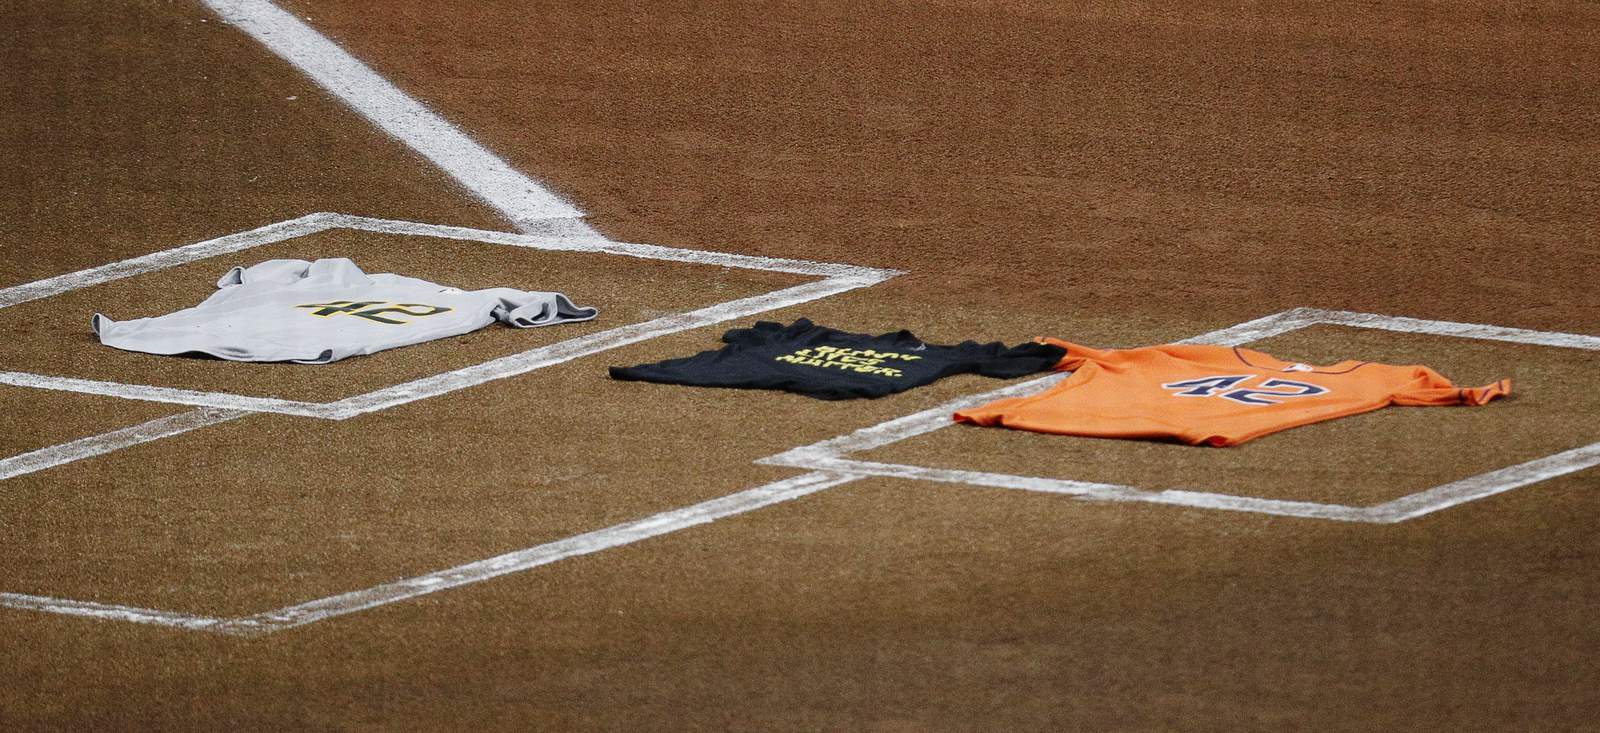 Astros opt to not play Friday night in protest of police brutality, Jacob Blake shooting